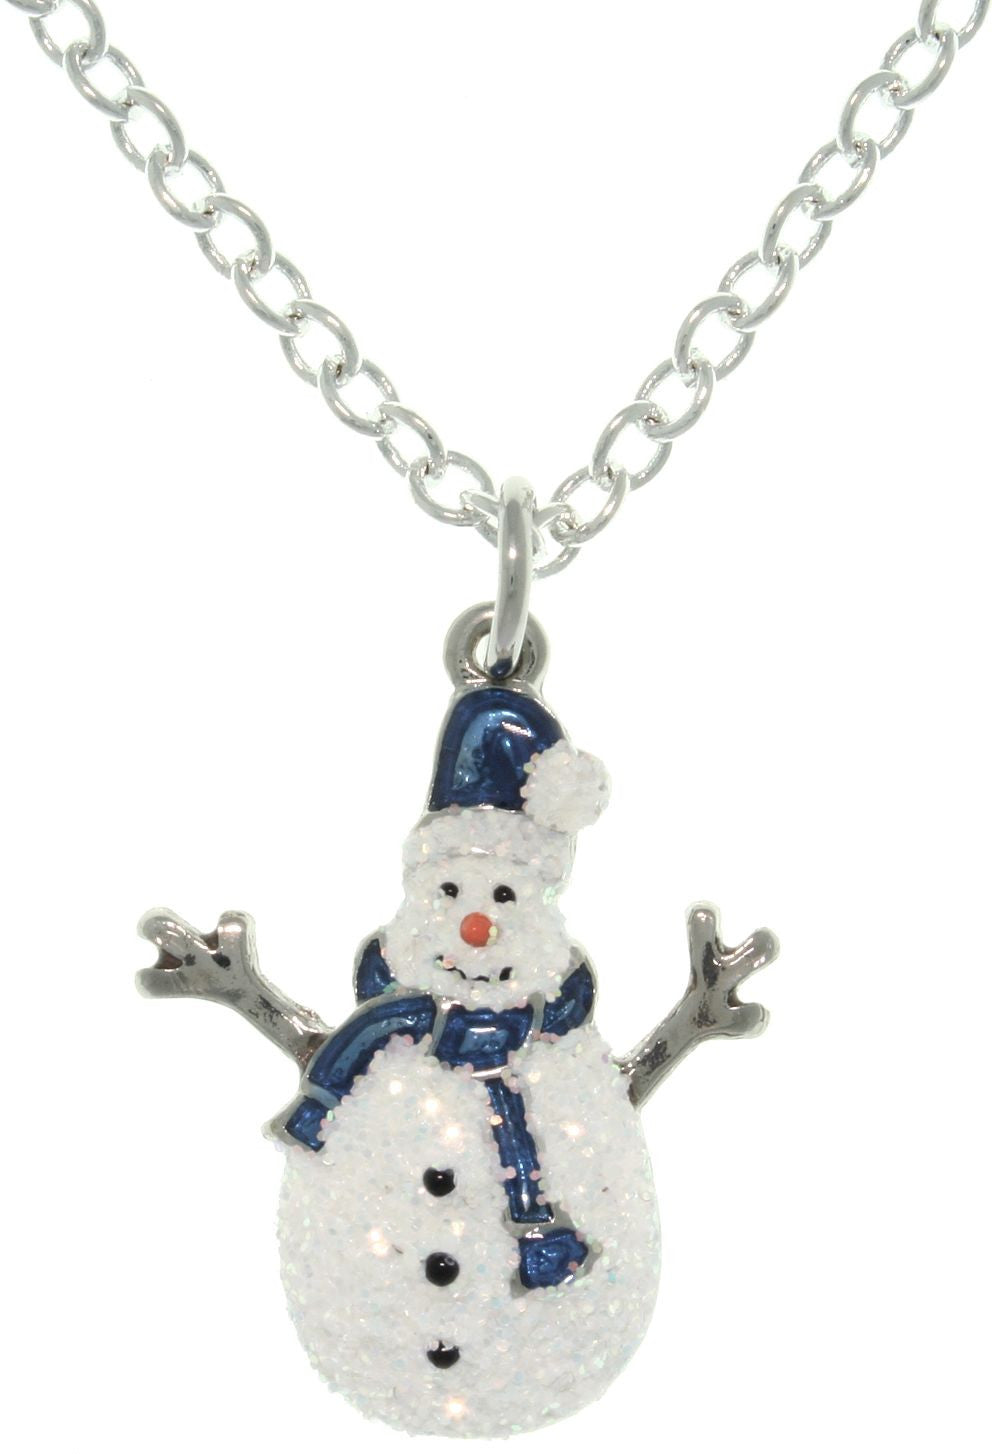 Jewelry Trends Pewter Enamel Holiday Glittered Snowman Charm with 18 Inch Chain Necklace Christmas Gift